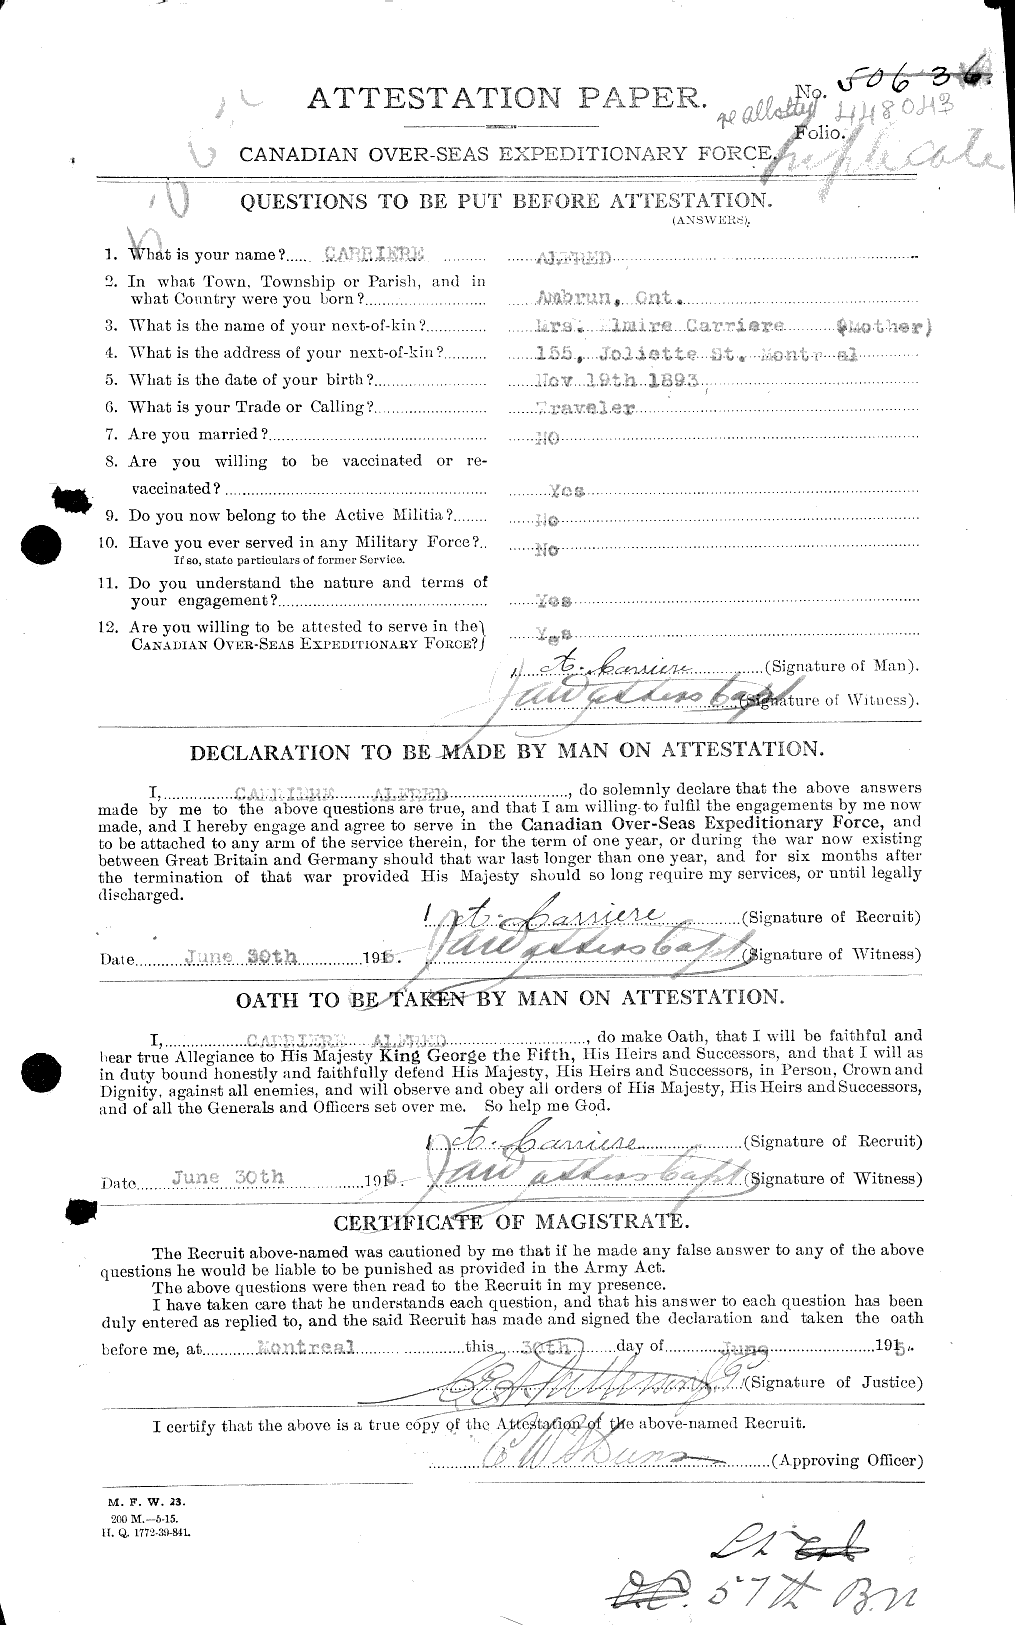 Personnel Records of the First World War - CEF 011344a